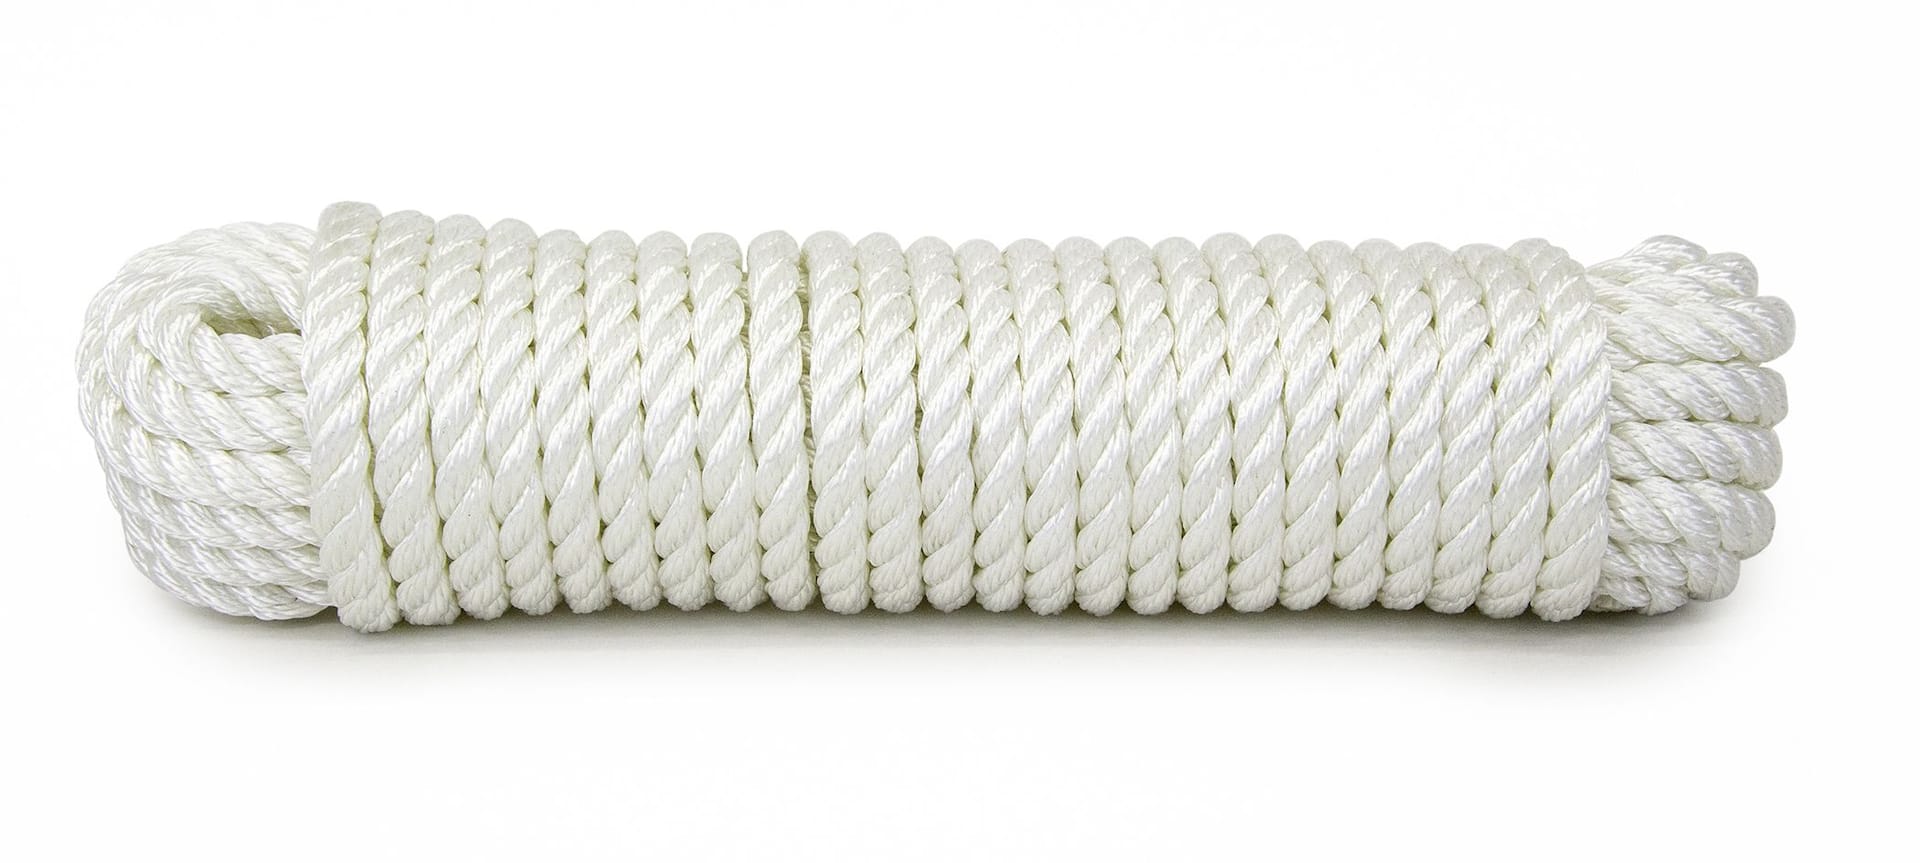 KingCord Nylon Twisted Rope, Strong and Flexible, Abrasion